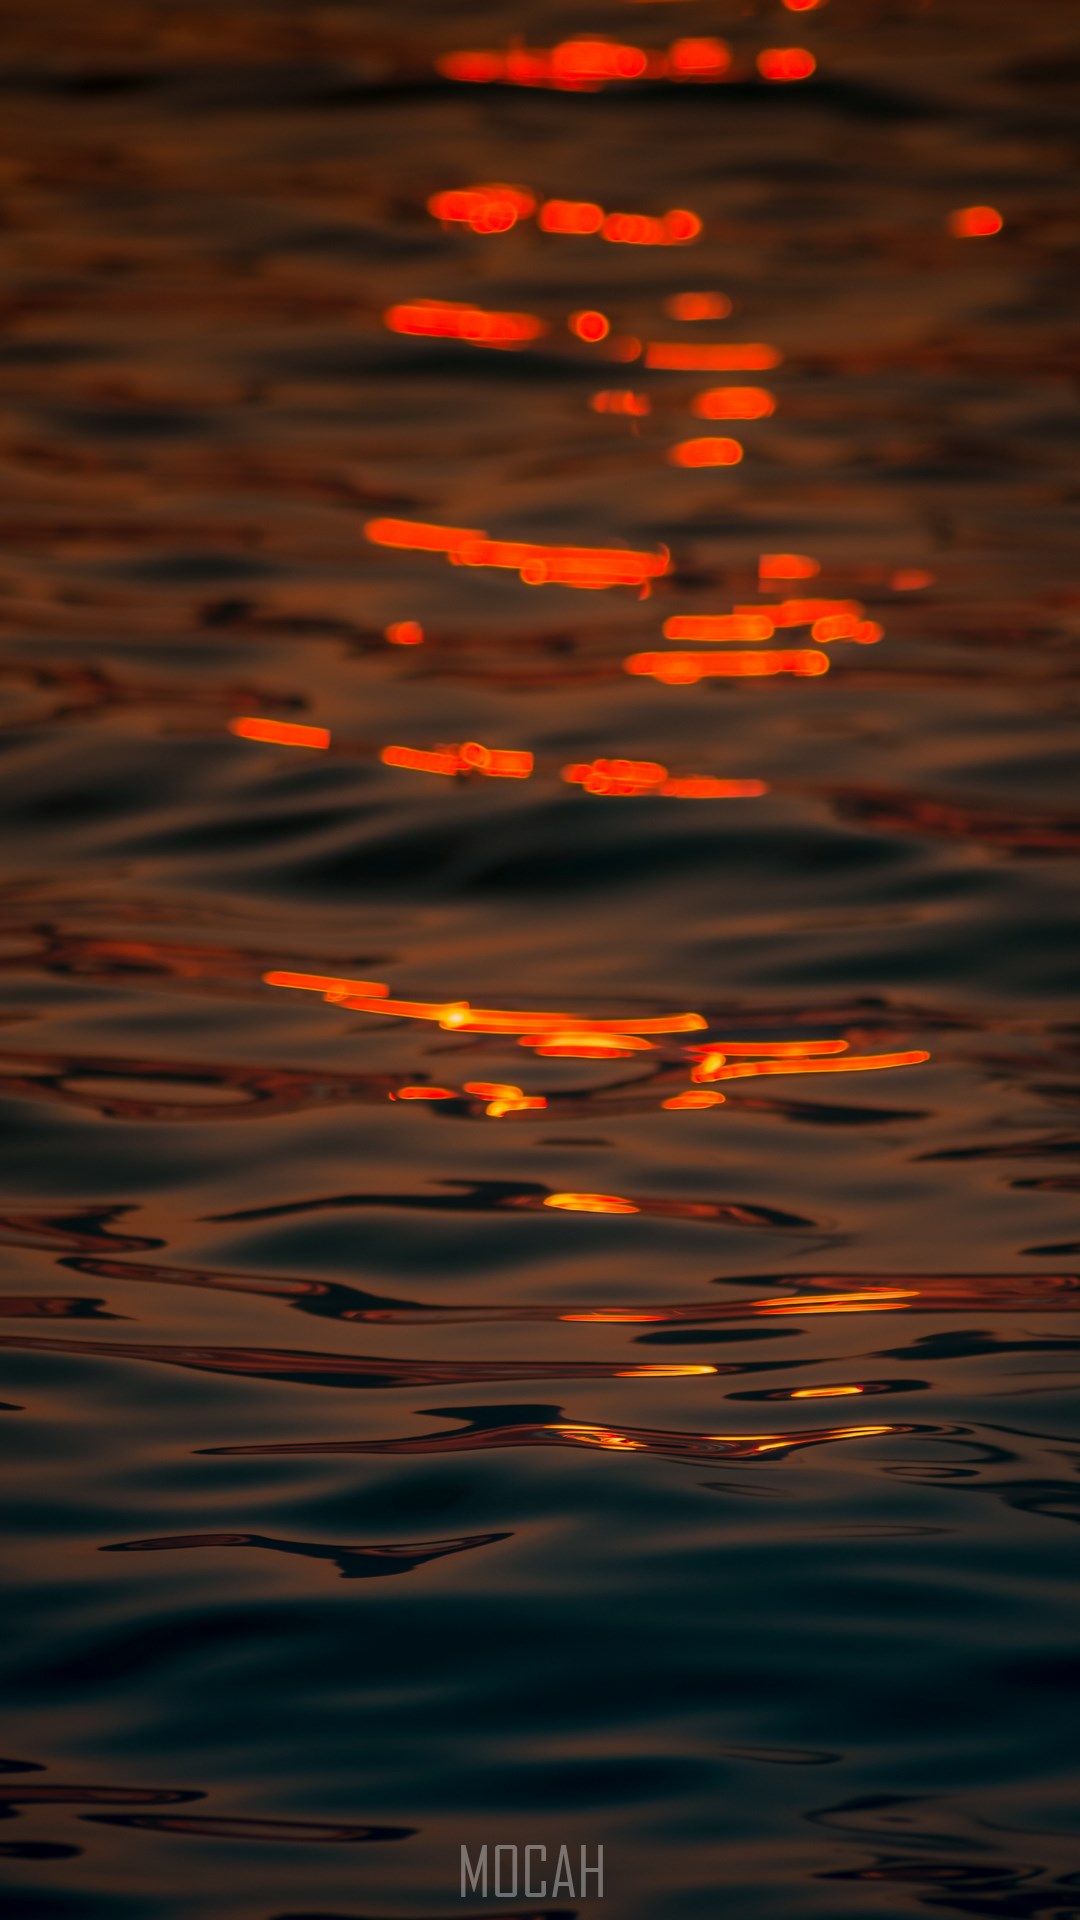 Sunlight reflecting on the water at sunset - Water